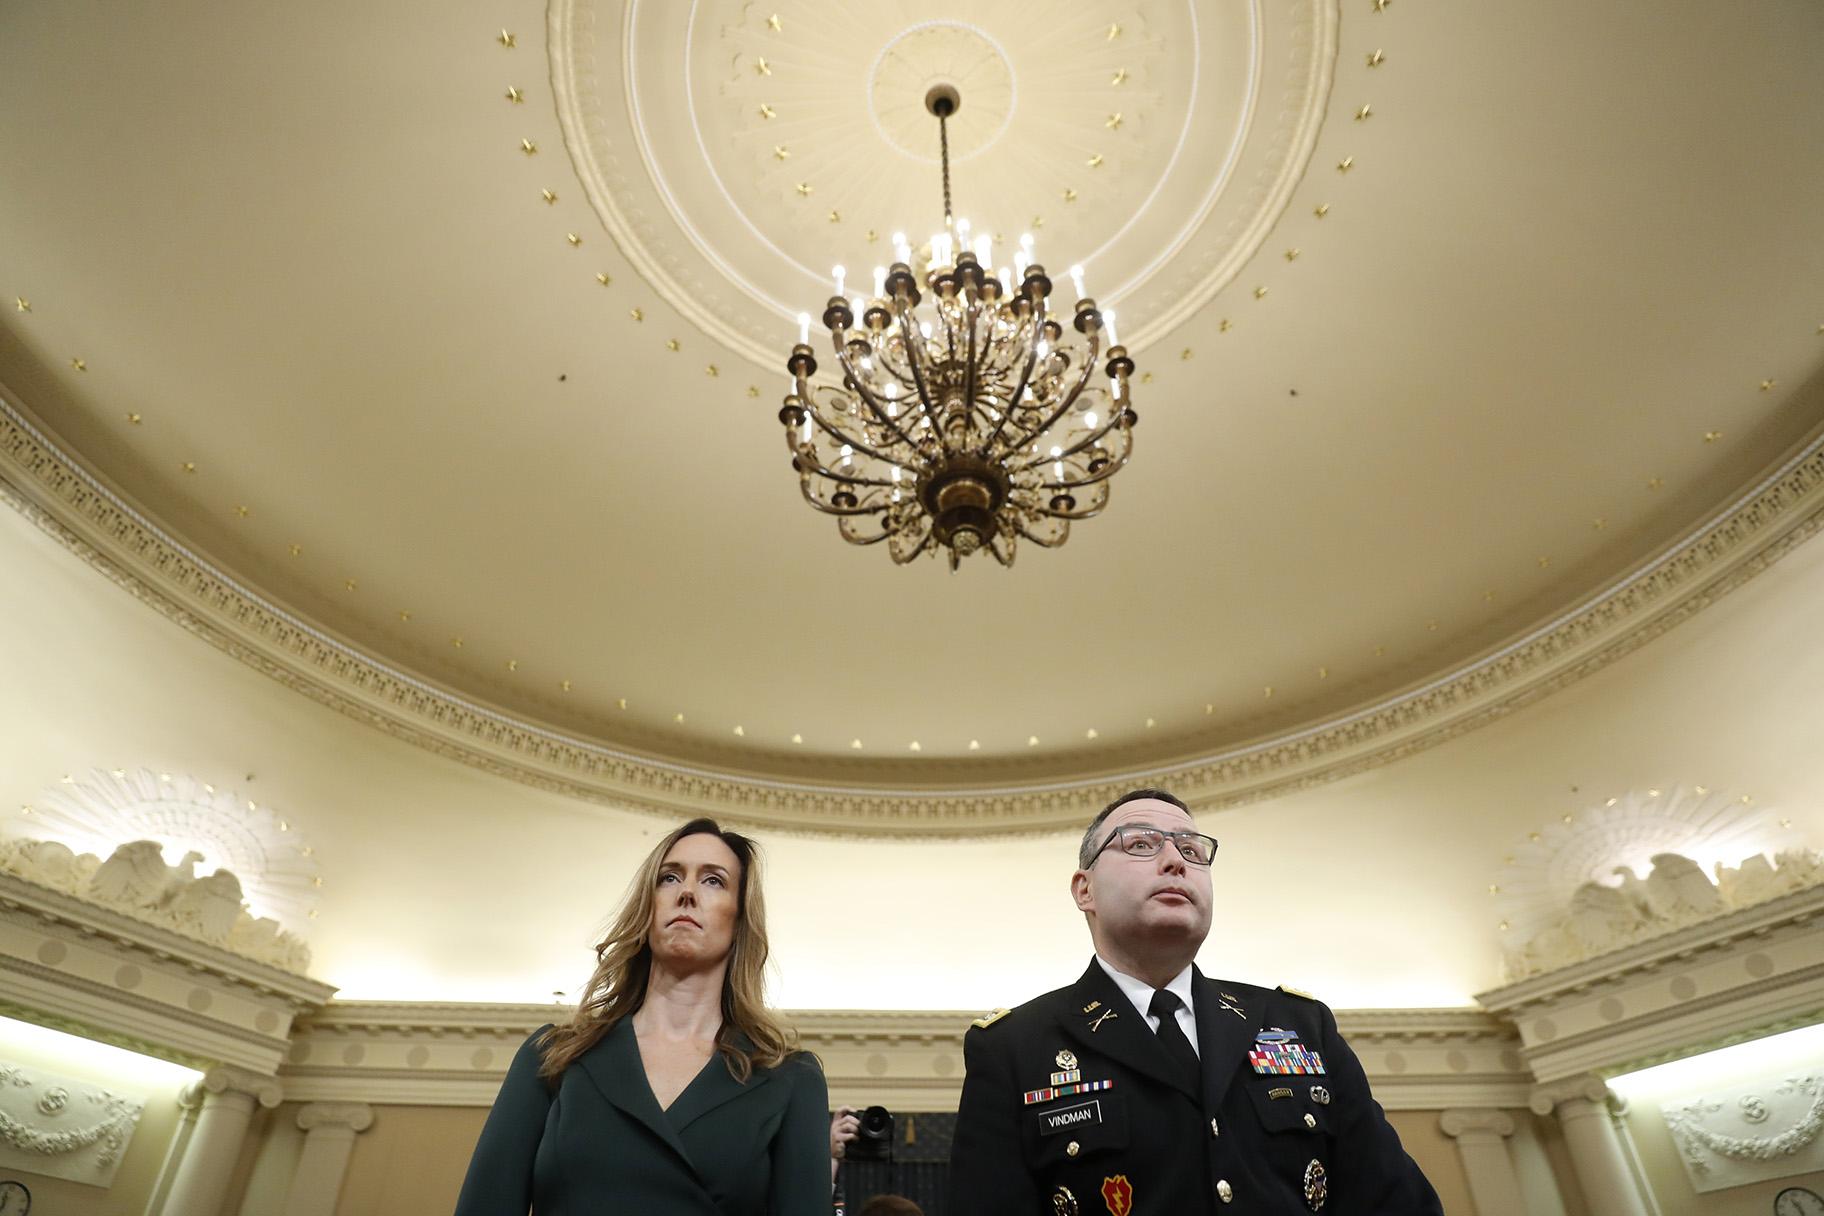 Jennifer Williams, an aide to Vice President Mike Pence, and National Security Council aide Lt. Col. Alexander Vindman stand as they take a break in hearing before the House Intelligence Committee on Capitol Hill in Washington, Tuesday, Nov. 19, 2019. (AP Photo / Andrew Harnik)